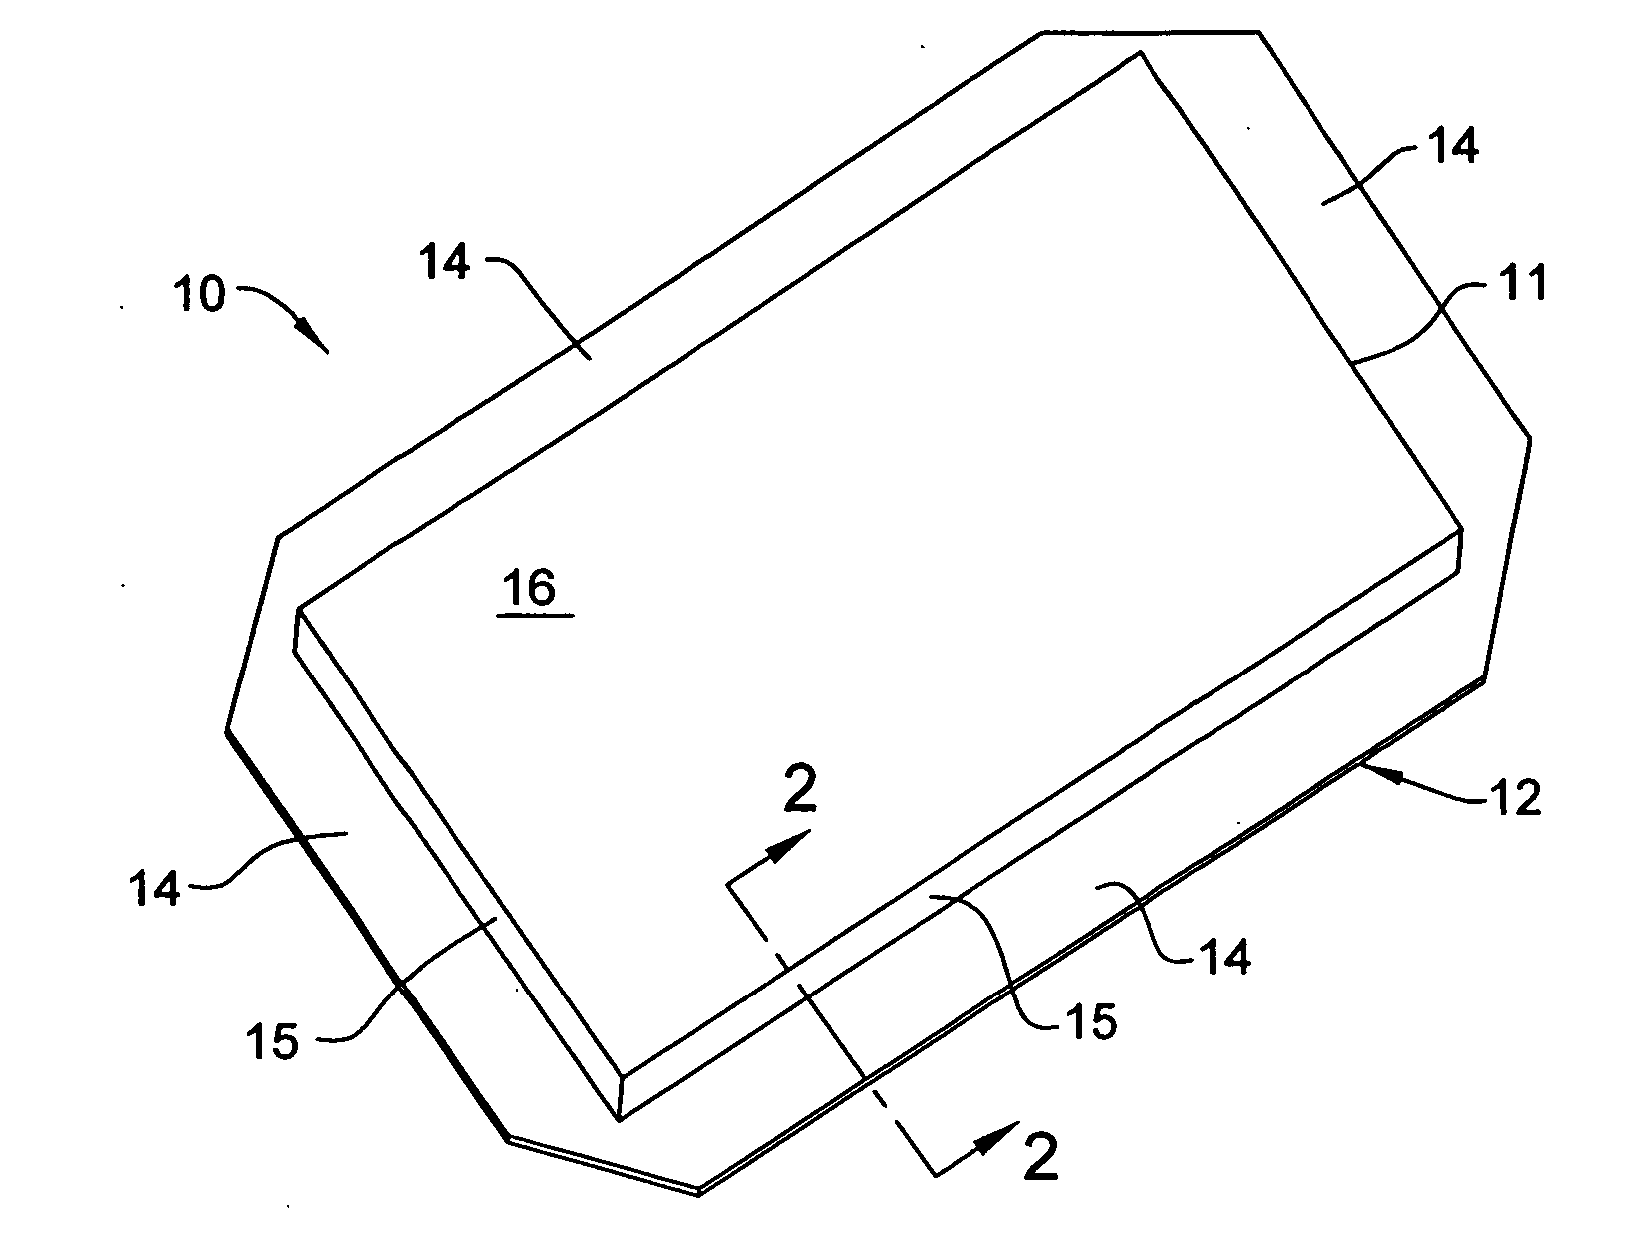 Process and apparatus for edge wrapping upholstered articles